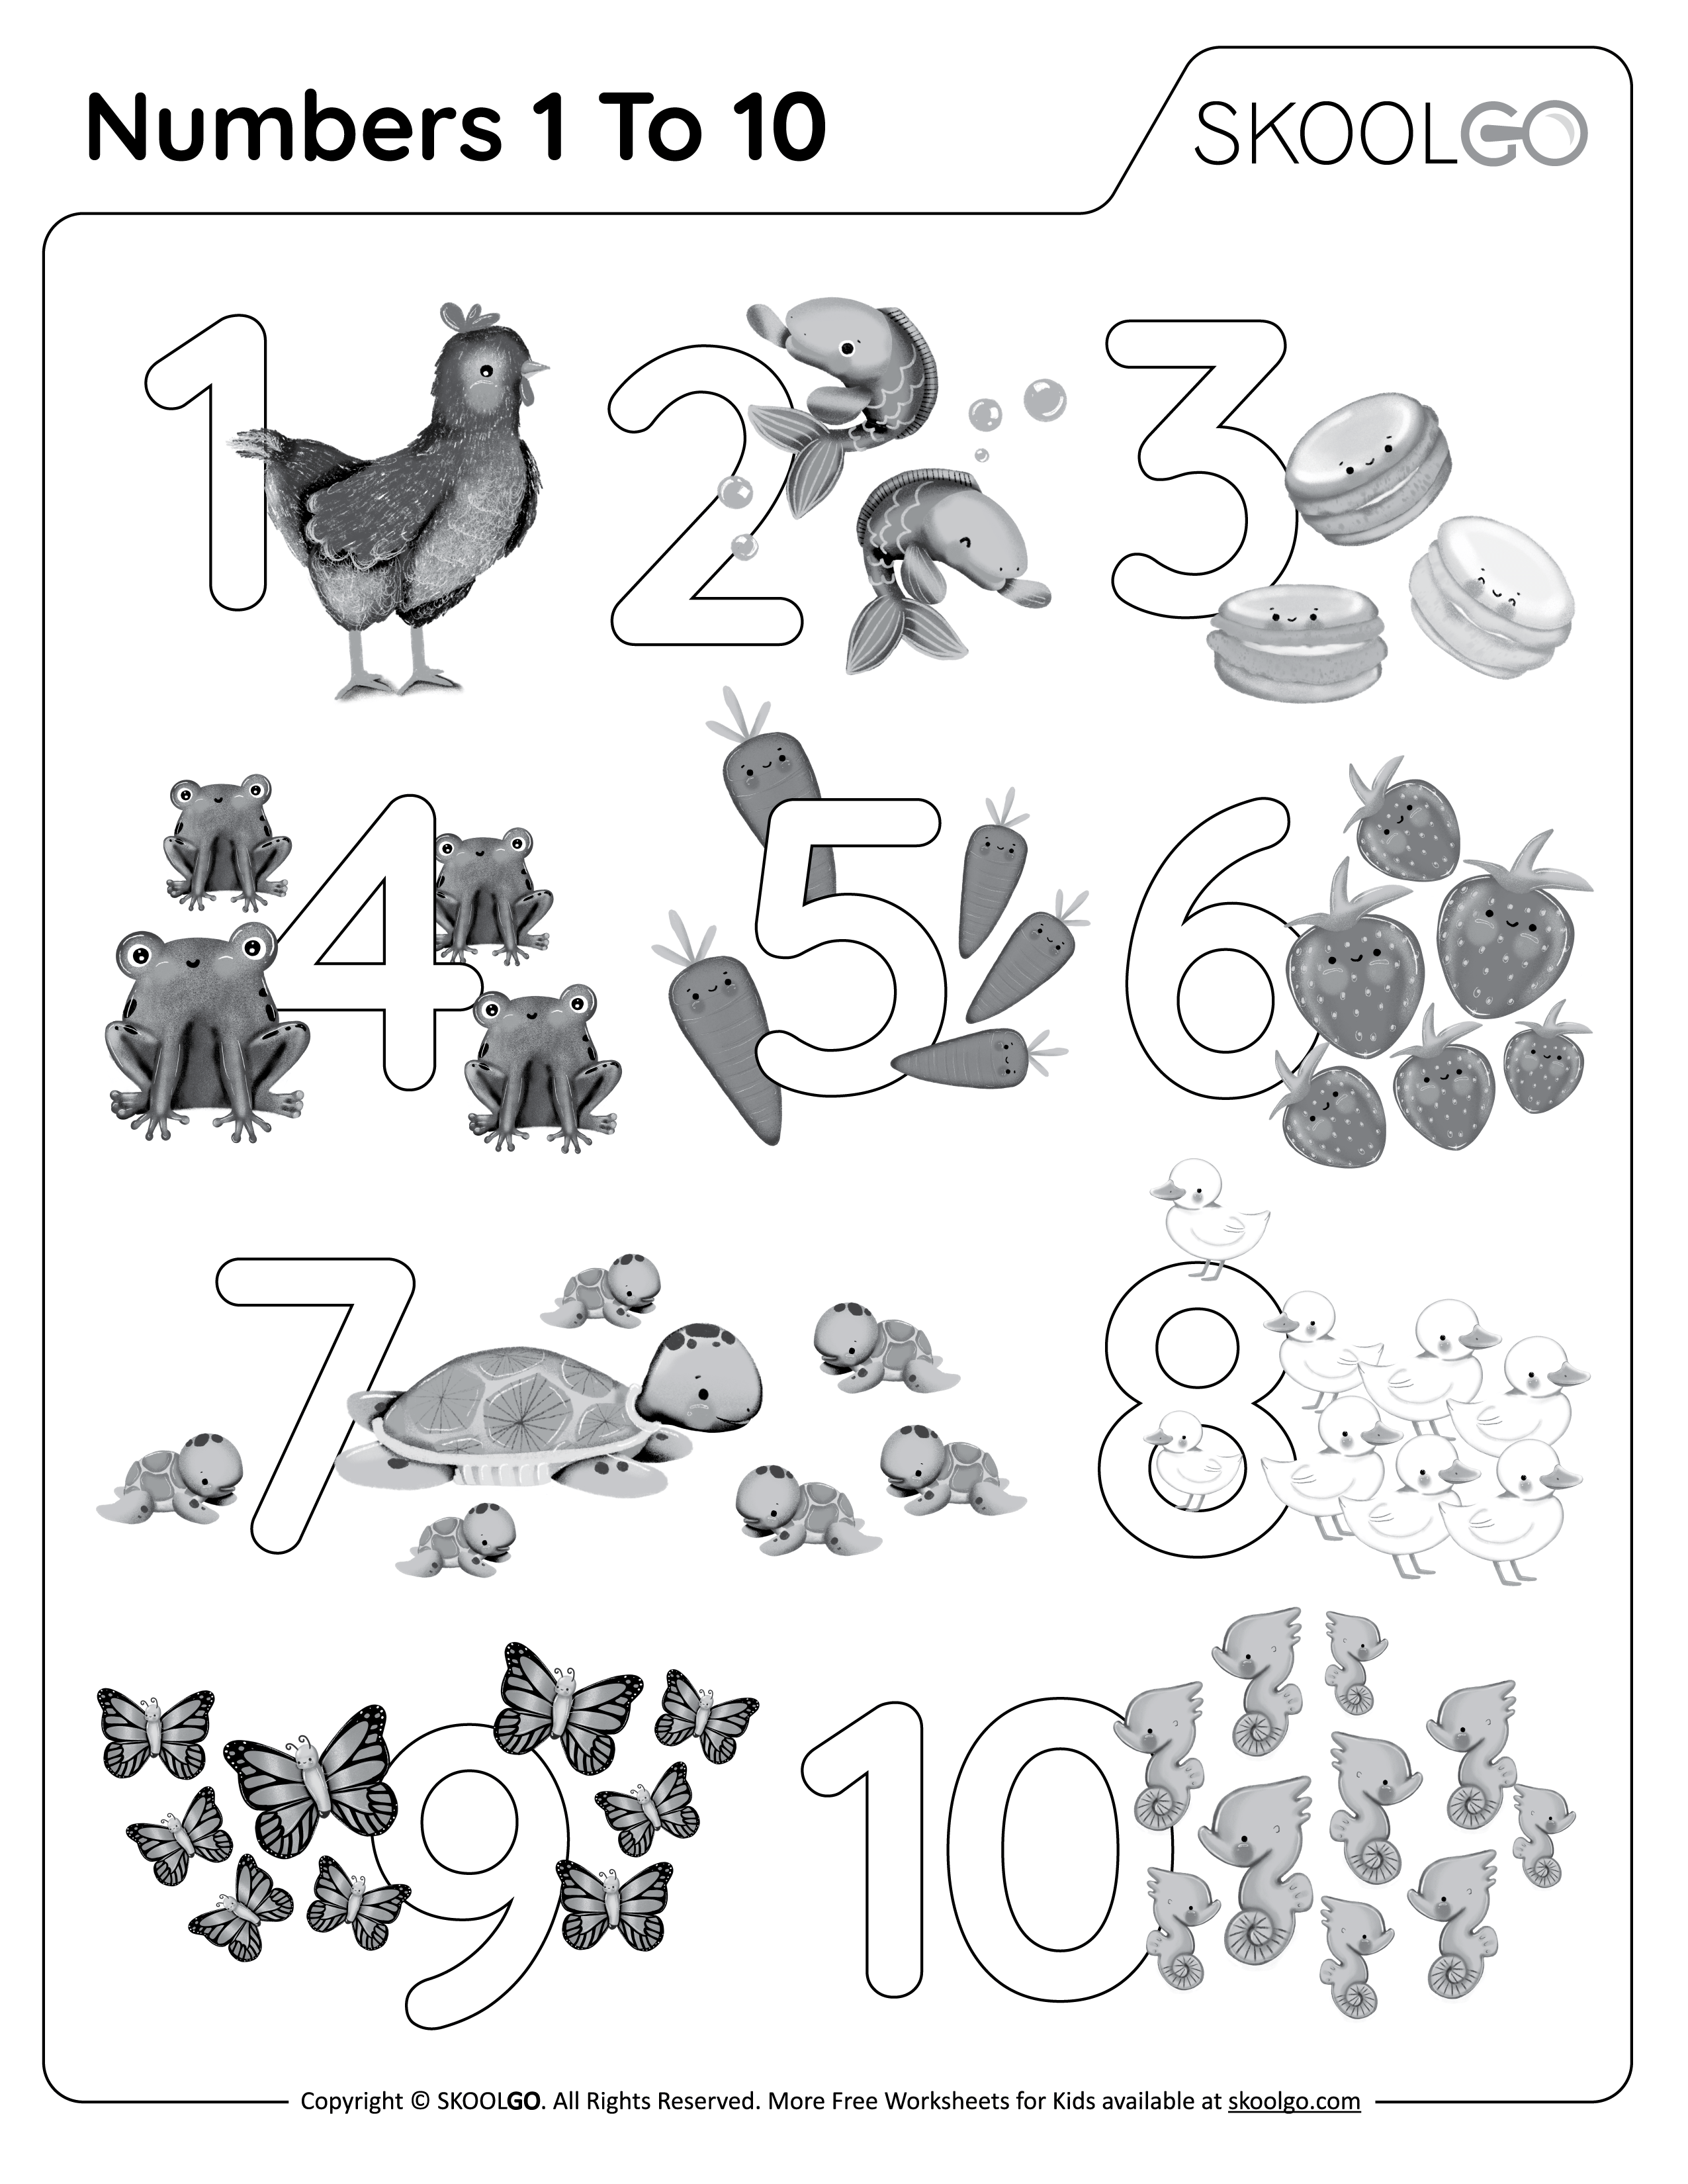 Number 1 to 10 - Free Worksheet for Kids - Black and White